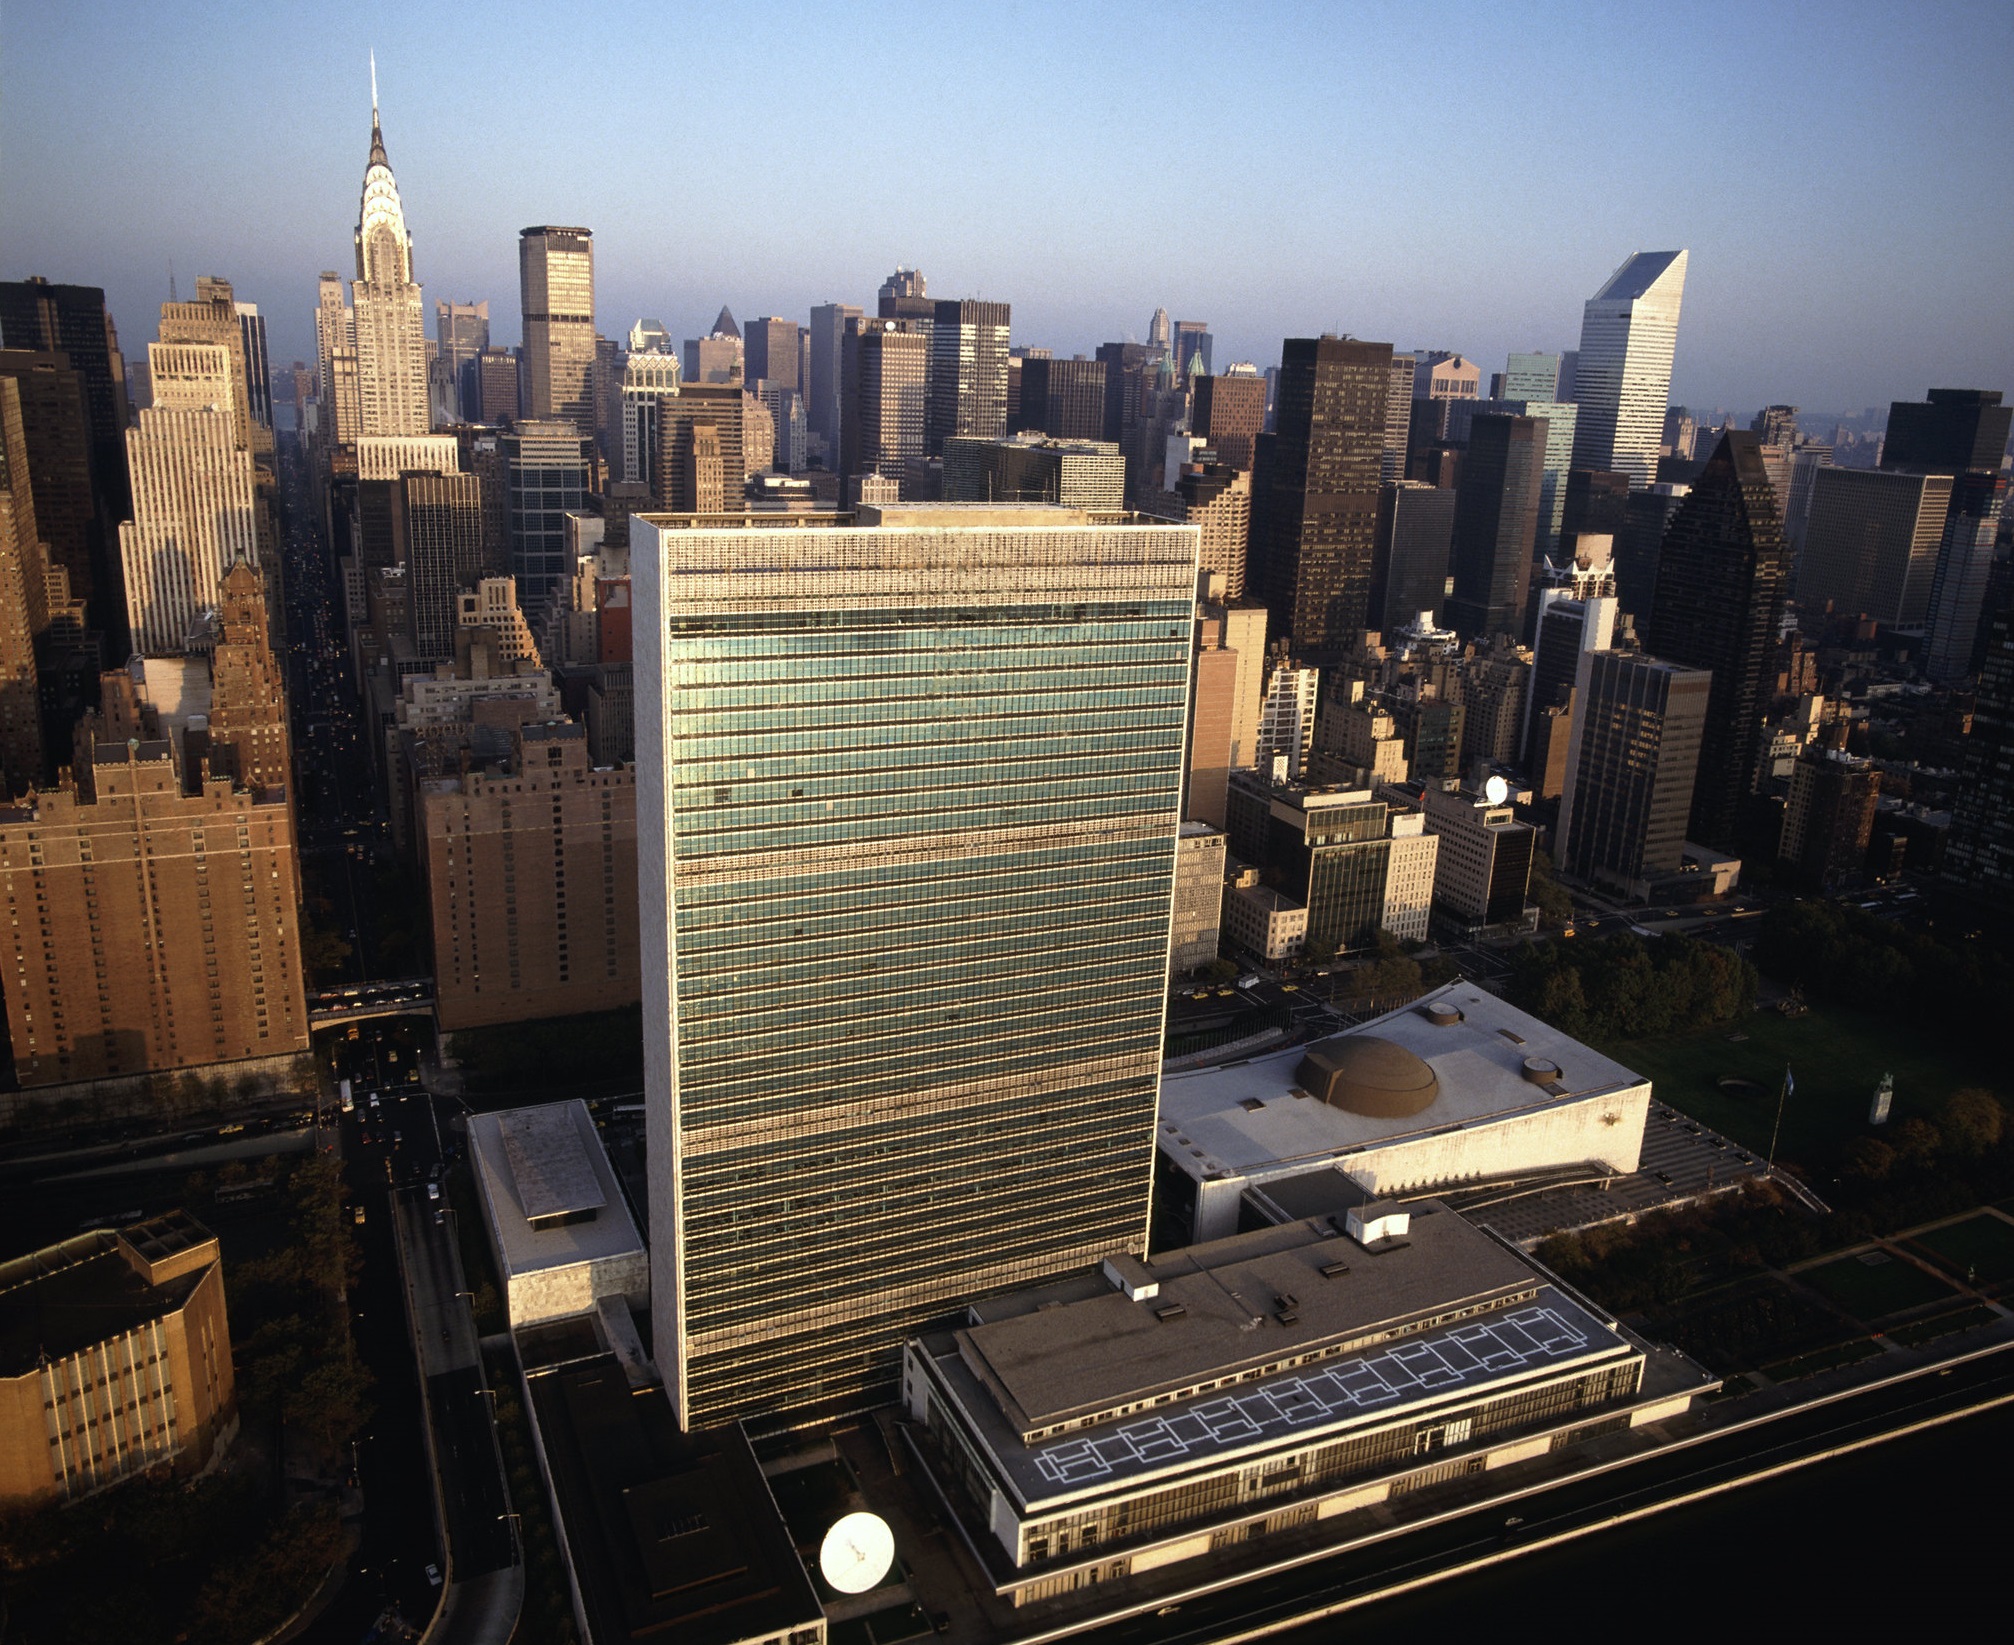 <p>The UN building has a Meditation Room that is completely free and open to the public. It’s a great way to see a little part of the iconic UN building.</p><p>Despite being located in NYC, the UN building is regarded as International Territory—meaning you are not technically in any country while you are in the building.</p><p><strong>Features:</strong> Meditation room, cultural experience</p><p>United Nations Photo, Flickr</p>